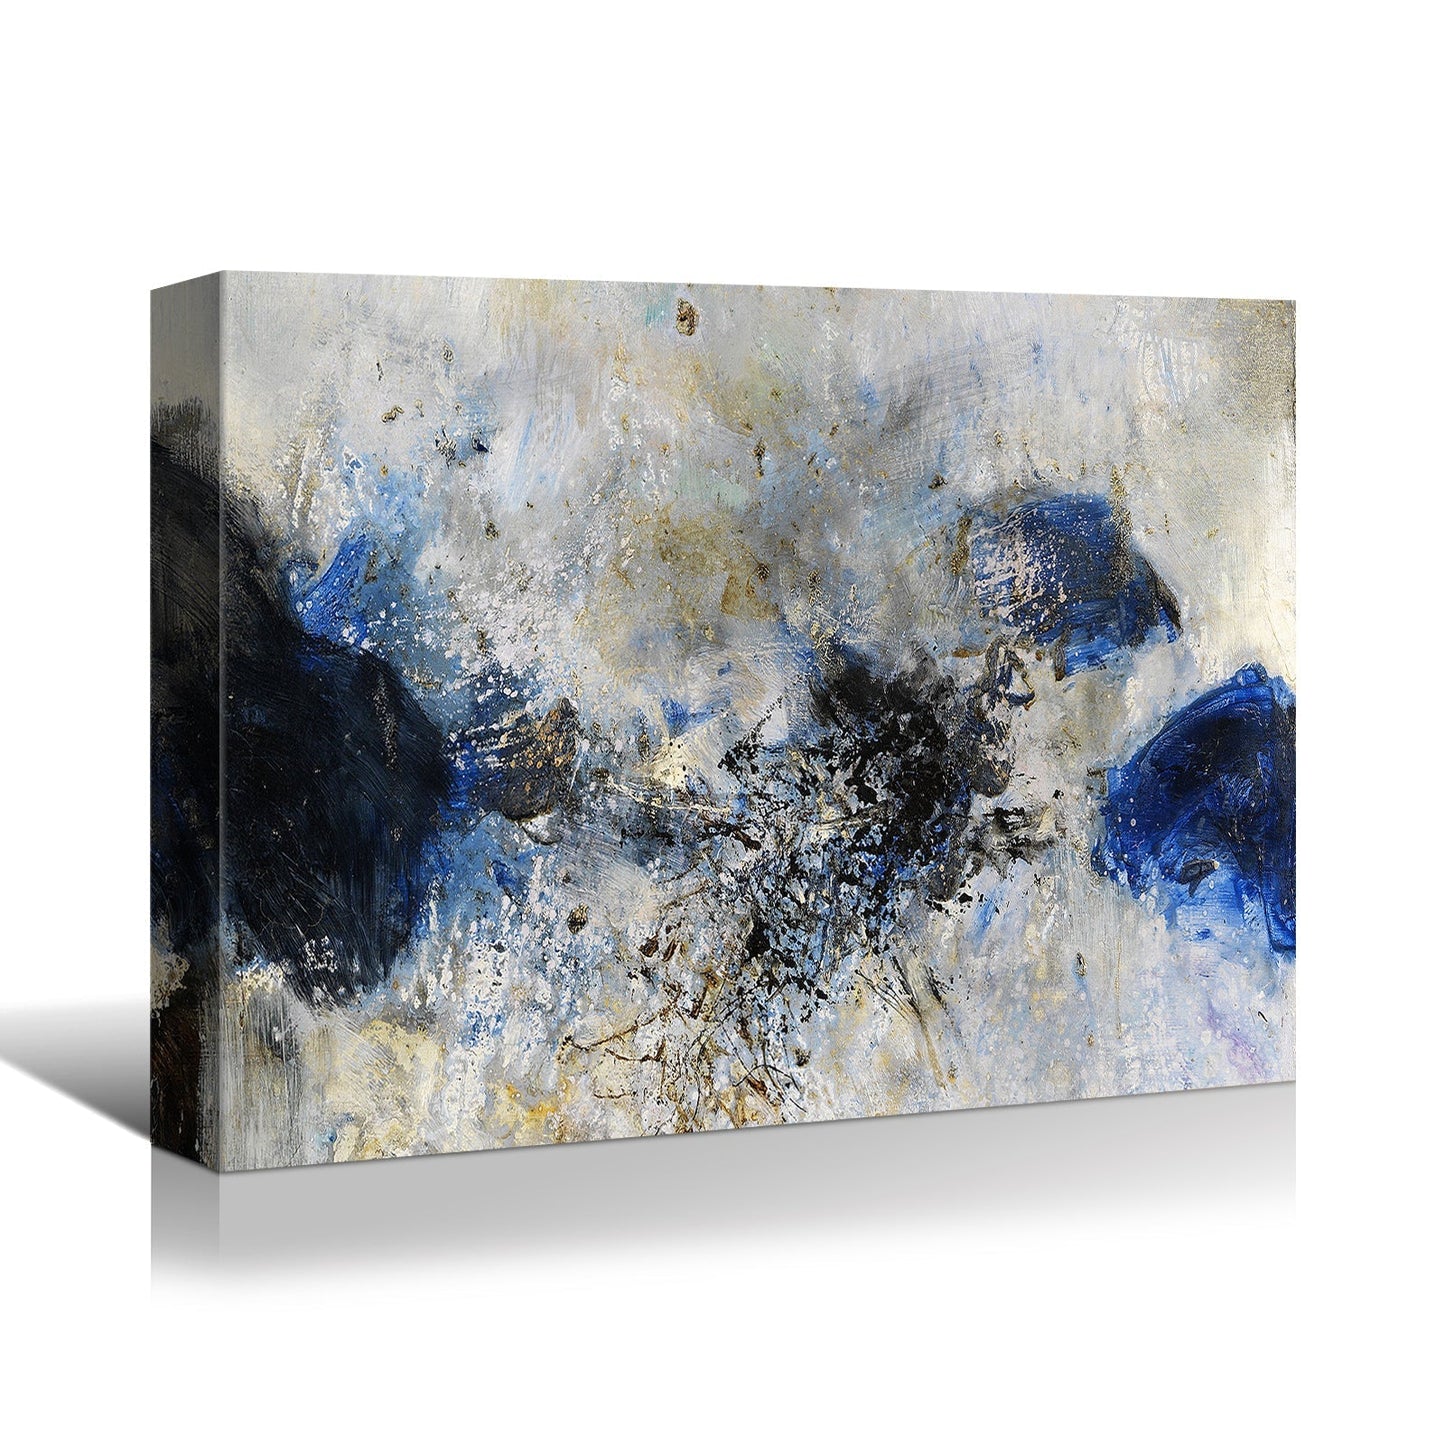 Framed Canvas Wall Art Decor Abstract Style Painting,Blue and  White Color Painting Decoration For Office Living Room, Bedroom Decor-Ready To Hang